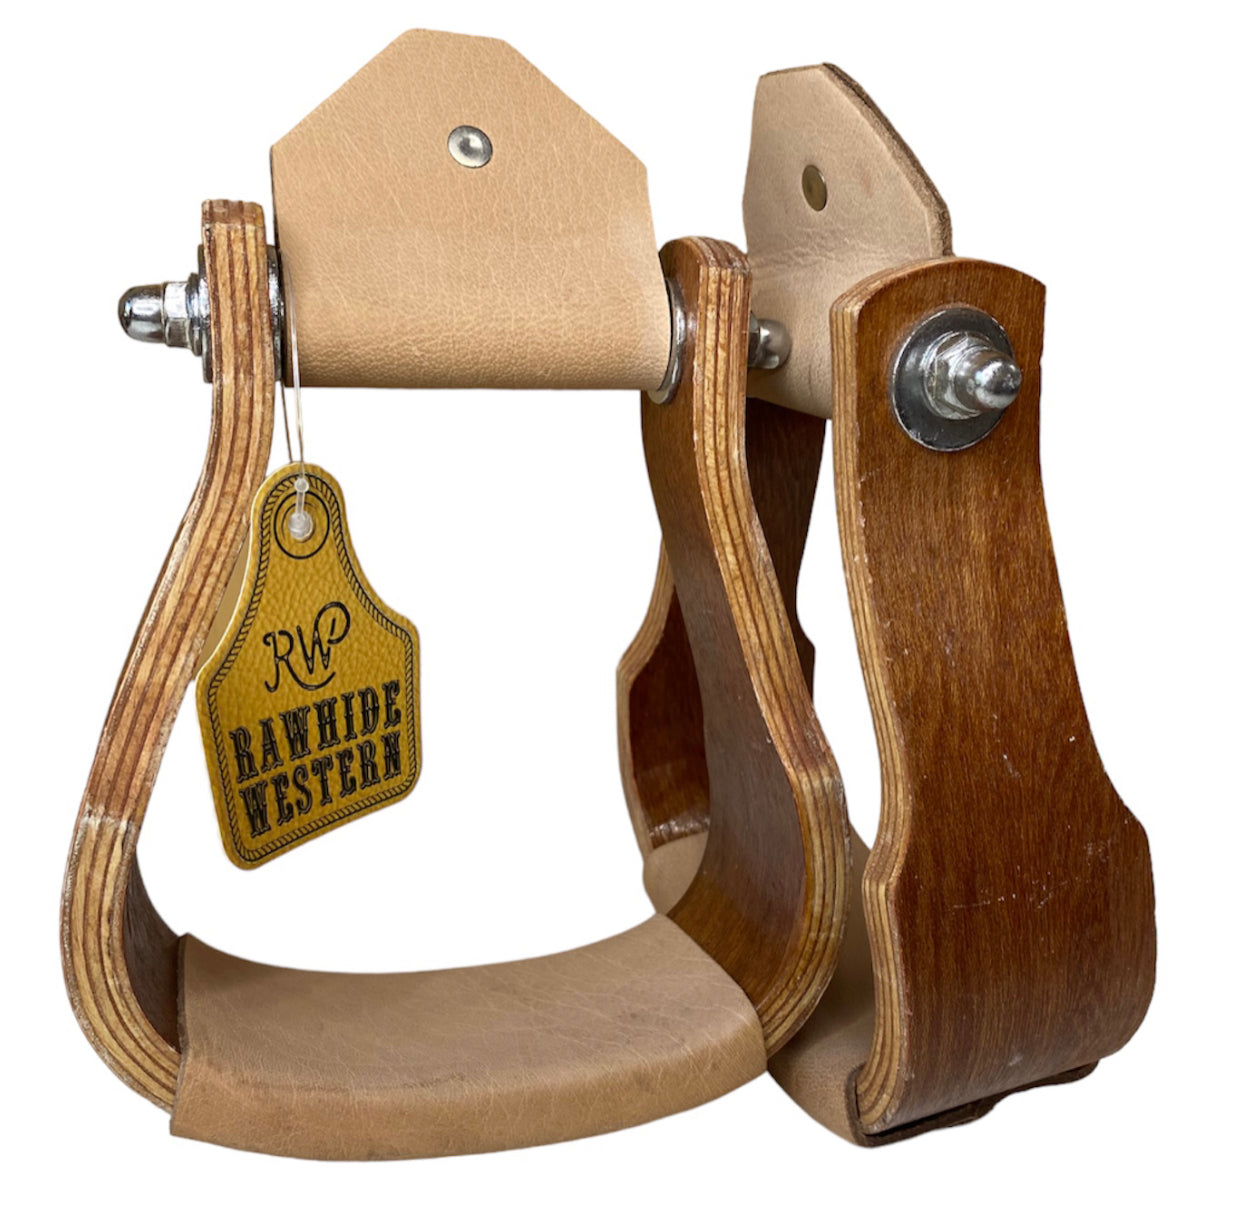 22168 - Wooden stirrup with leather foot pad